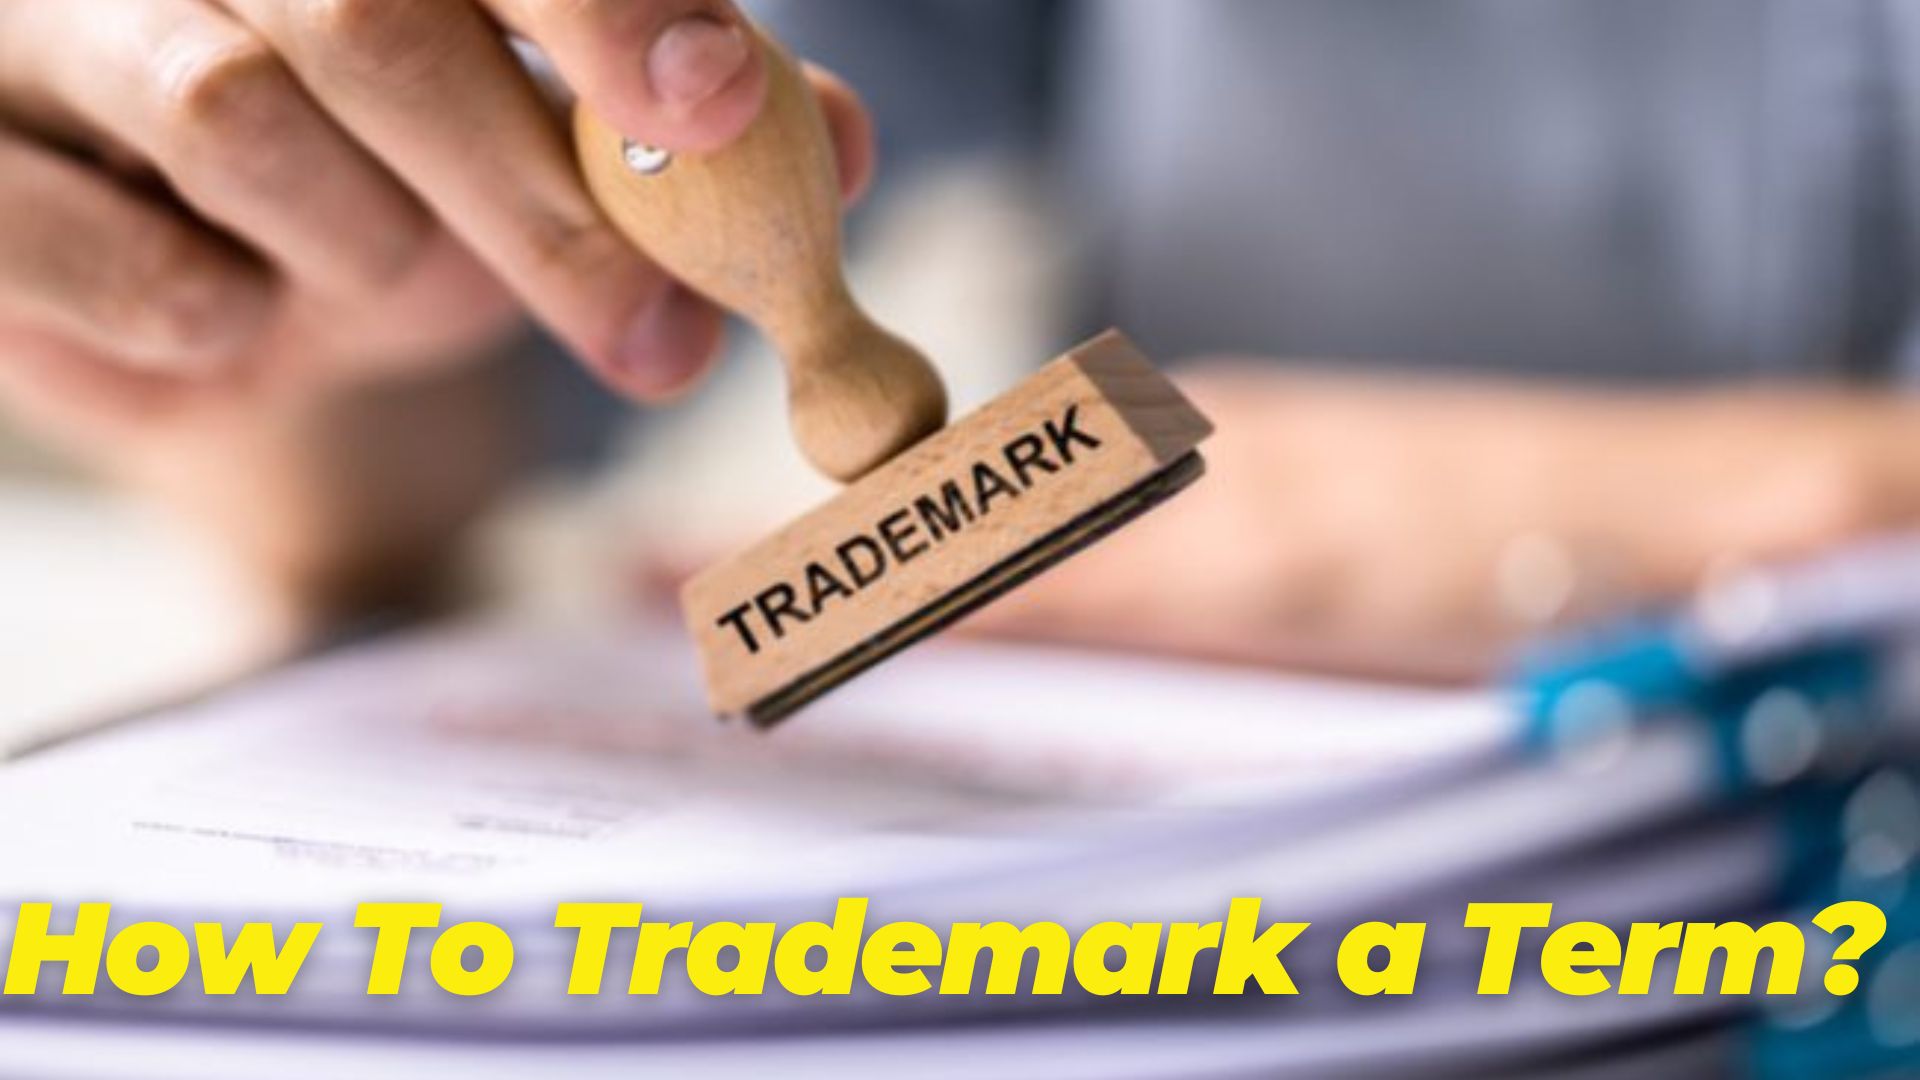 How To Trademark a Term